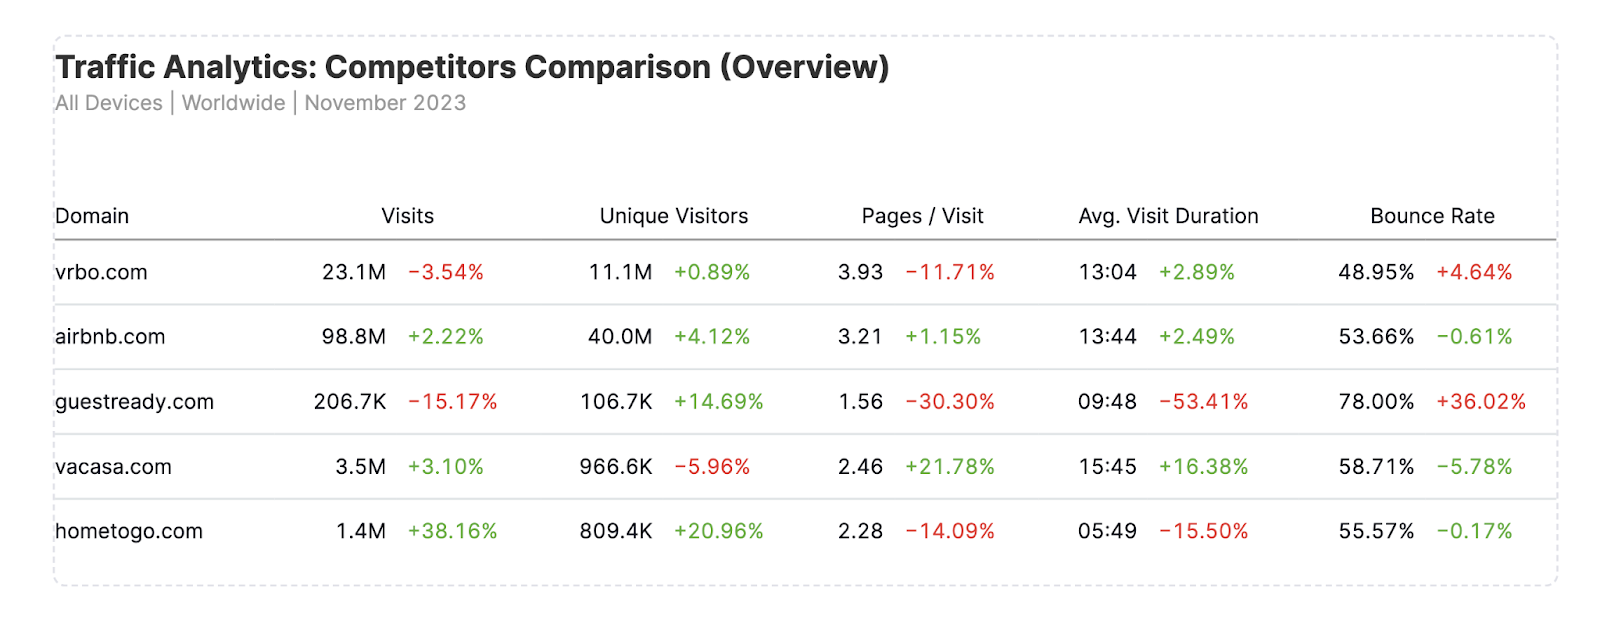 "Traffic Analytics: Competitors Comparison (Overview)" report with new competitors added